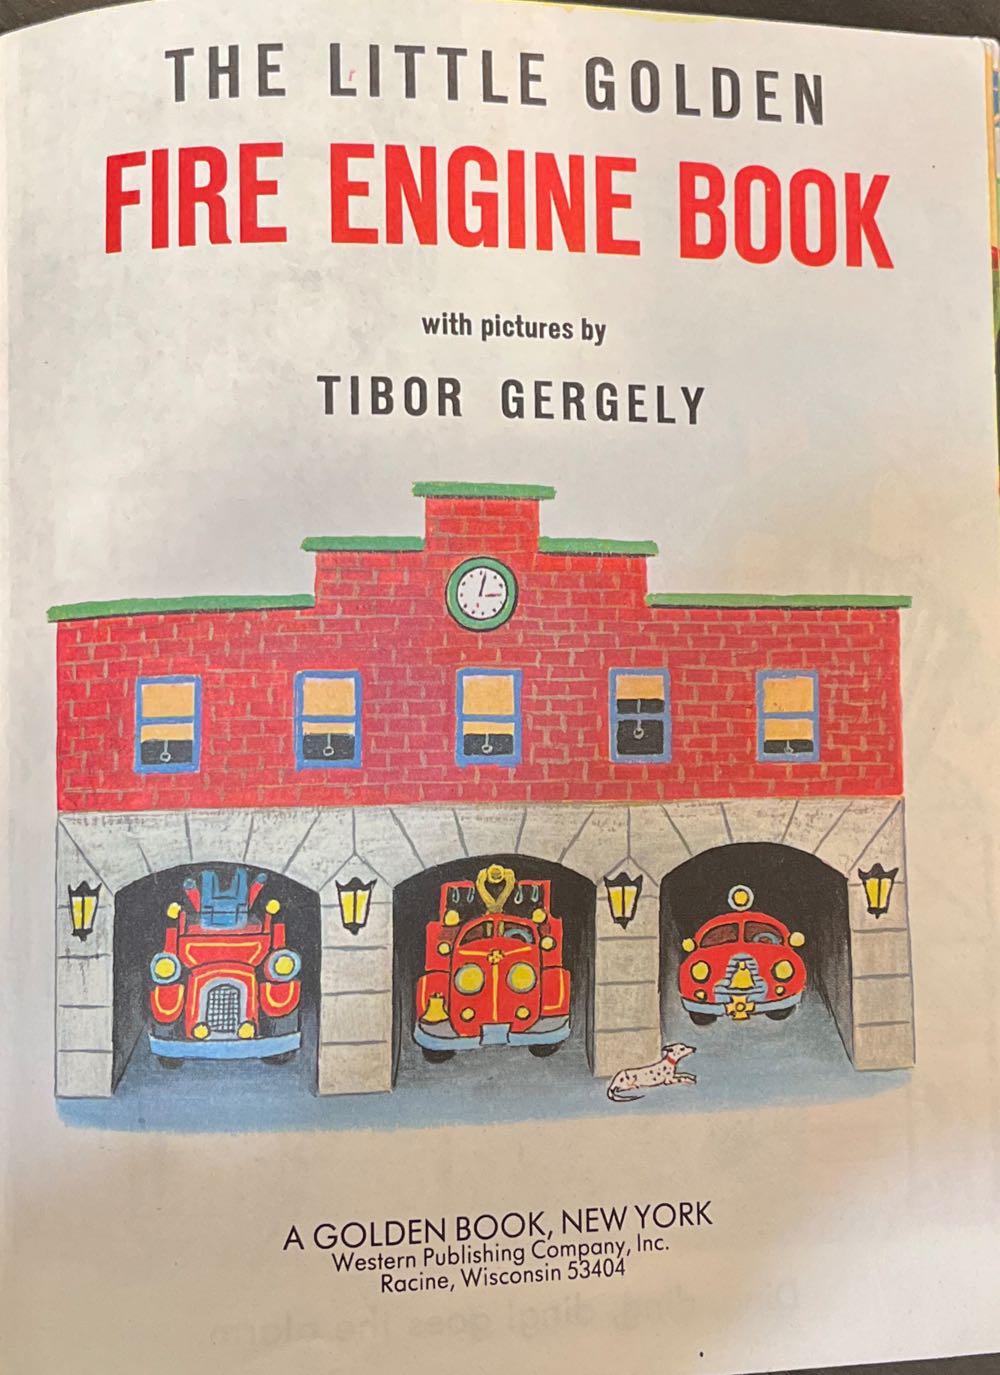 Fire Engines - Anne Rockwell (Golden Books - Hardcover) book collectible [Barcode 9780307020956] - Main Image 3